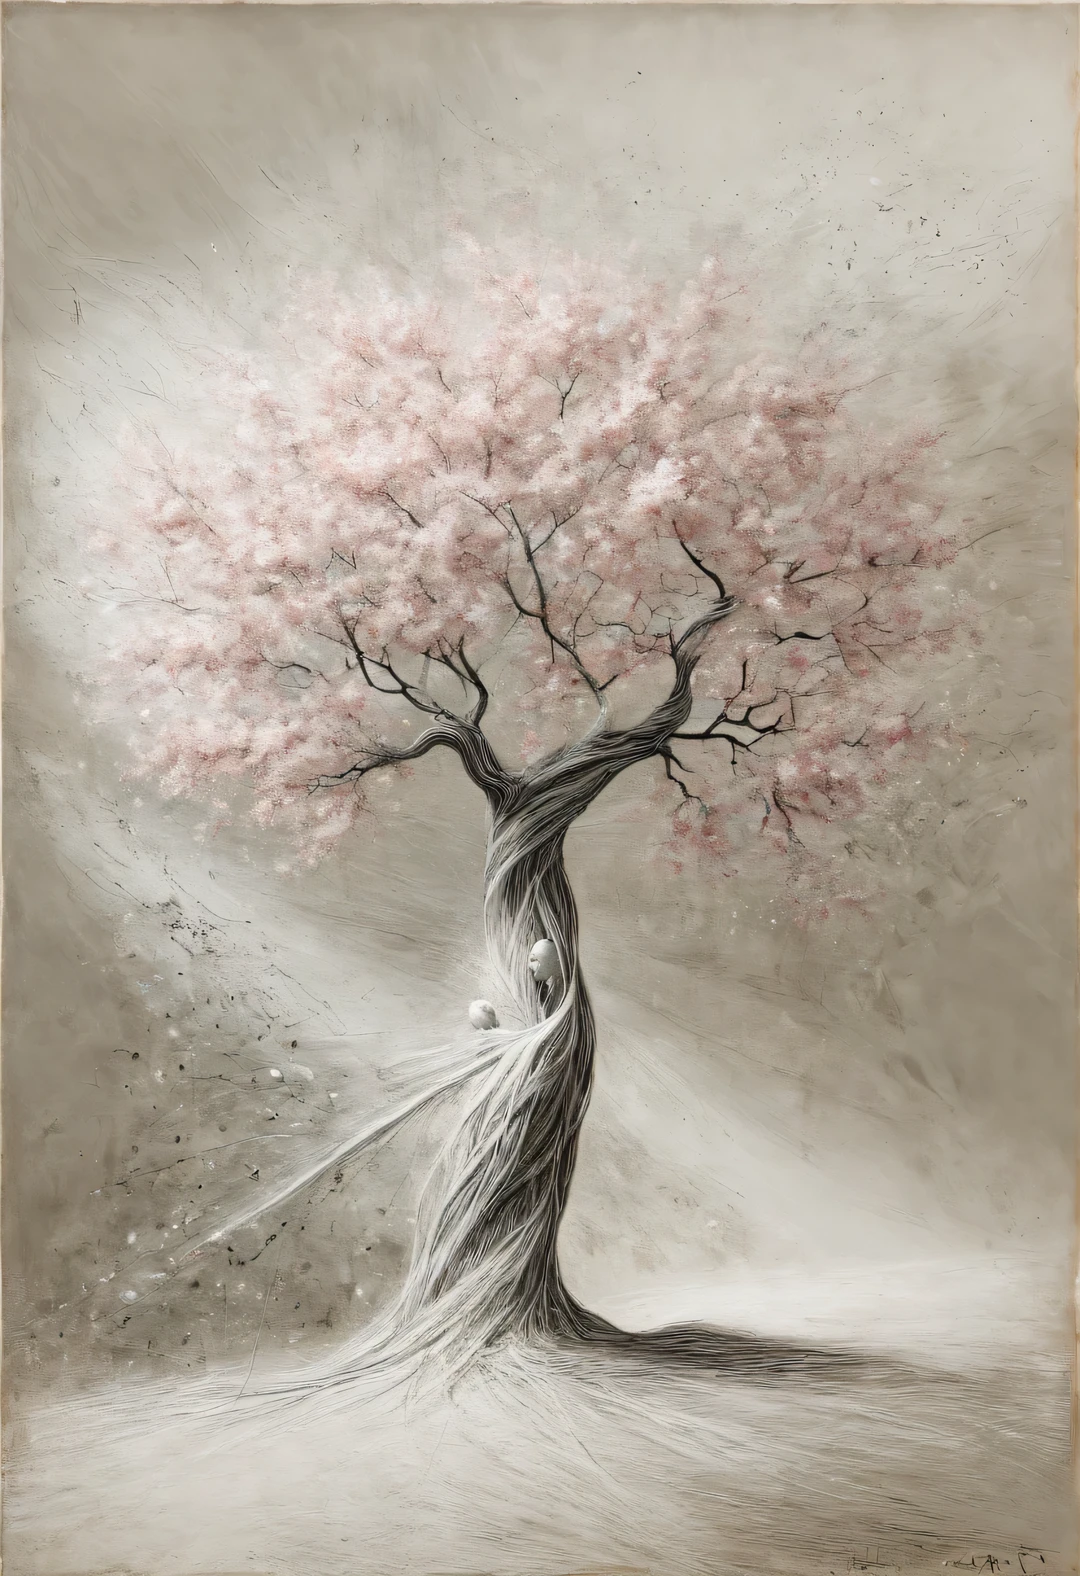 modern Art, Vanguard, surrealism, connecting the incongruous, a blooming sakura tree intricately intertwines its branches and forms a distinct image (Sakura Girl:1.3050), very beautiful picture, combining various drawing techniques, Ultra-fine lines and crisp details create the illusion of a three-dimensional image, and the play of light and shadow creates a feeling of living space in the picture, lighting from different sides creates additional illusions, shadows create the illusion of a double image, the interweaving of fine lines creates unimaginable depth and a feeling of endless space, made in oil and acrylic in combination with pastel and graphite., drawing on rough crumpled craft paper, Do it, Bridget Bate Tichenor, Gertrude Abercrombie, Joan Miro, Masterpiece, Master&#39;s work, worthy of an award